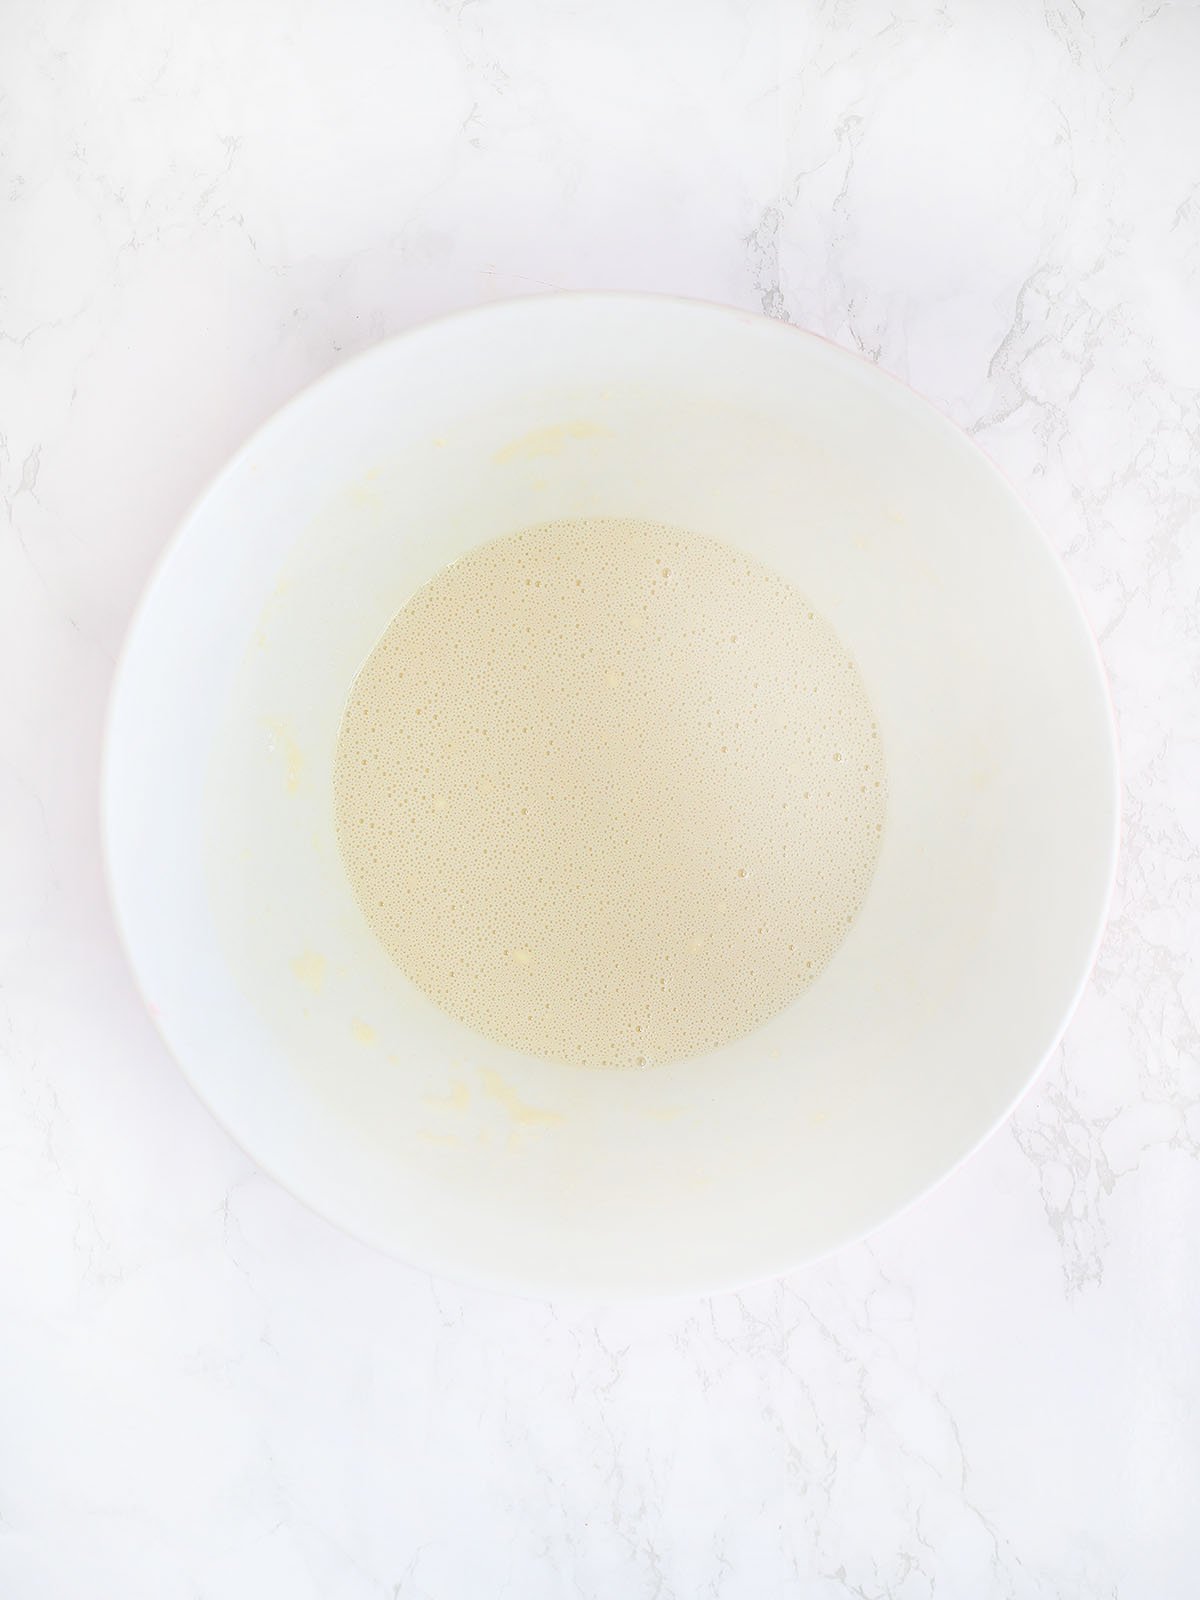 cobbler crust batter in a white mixing bowl